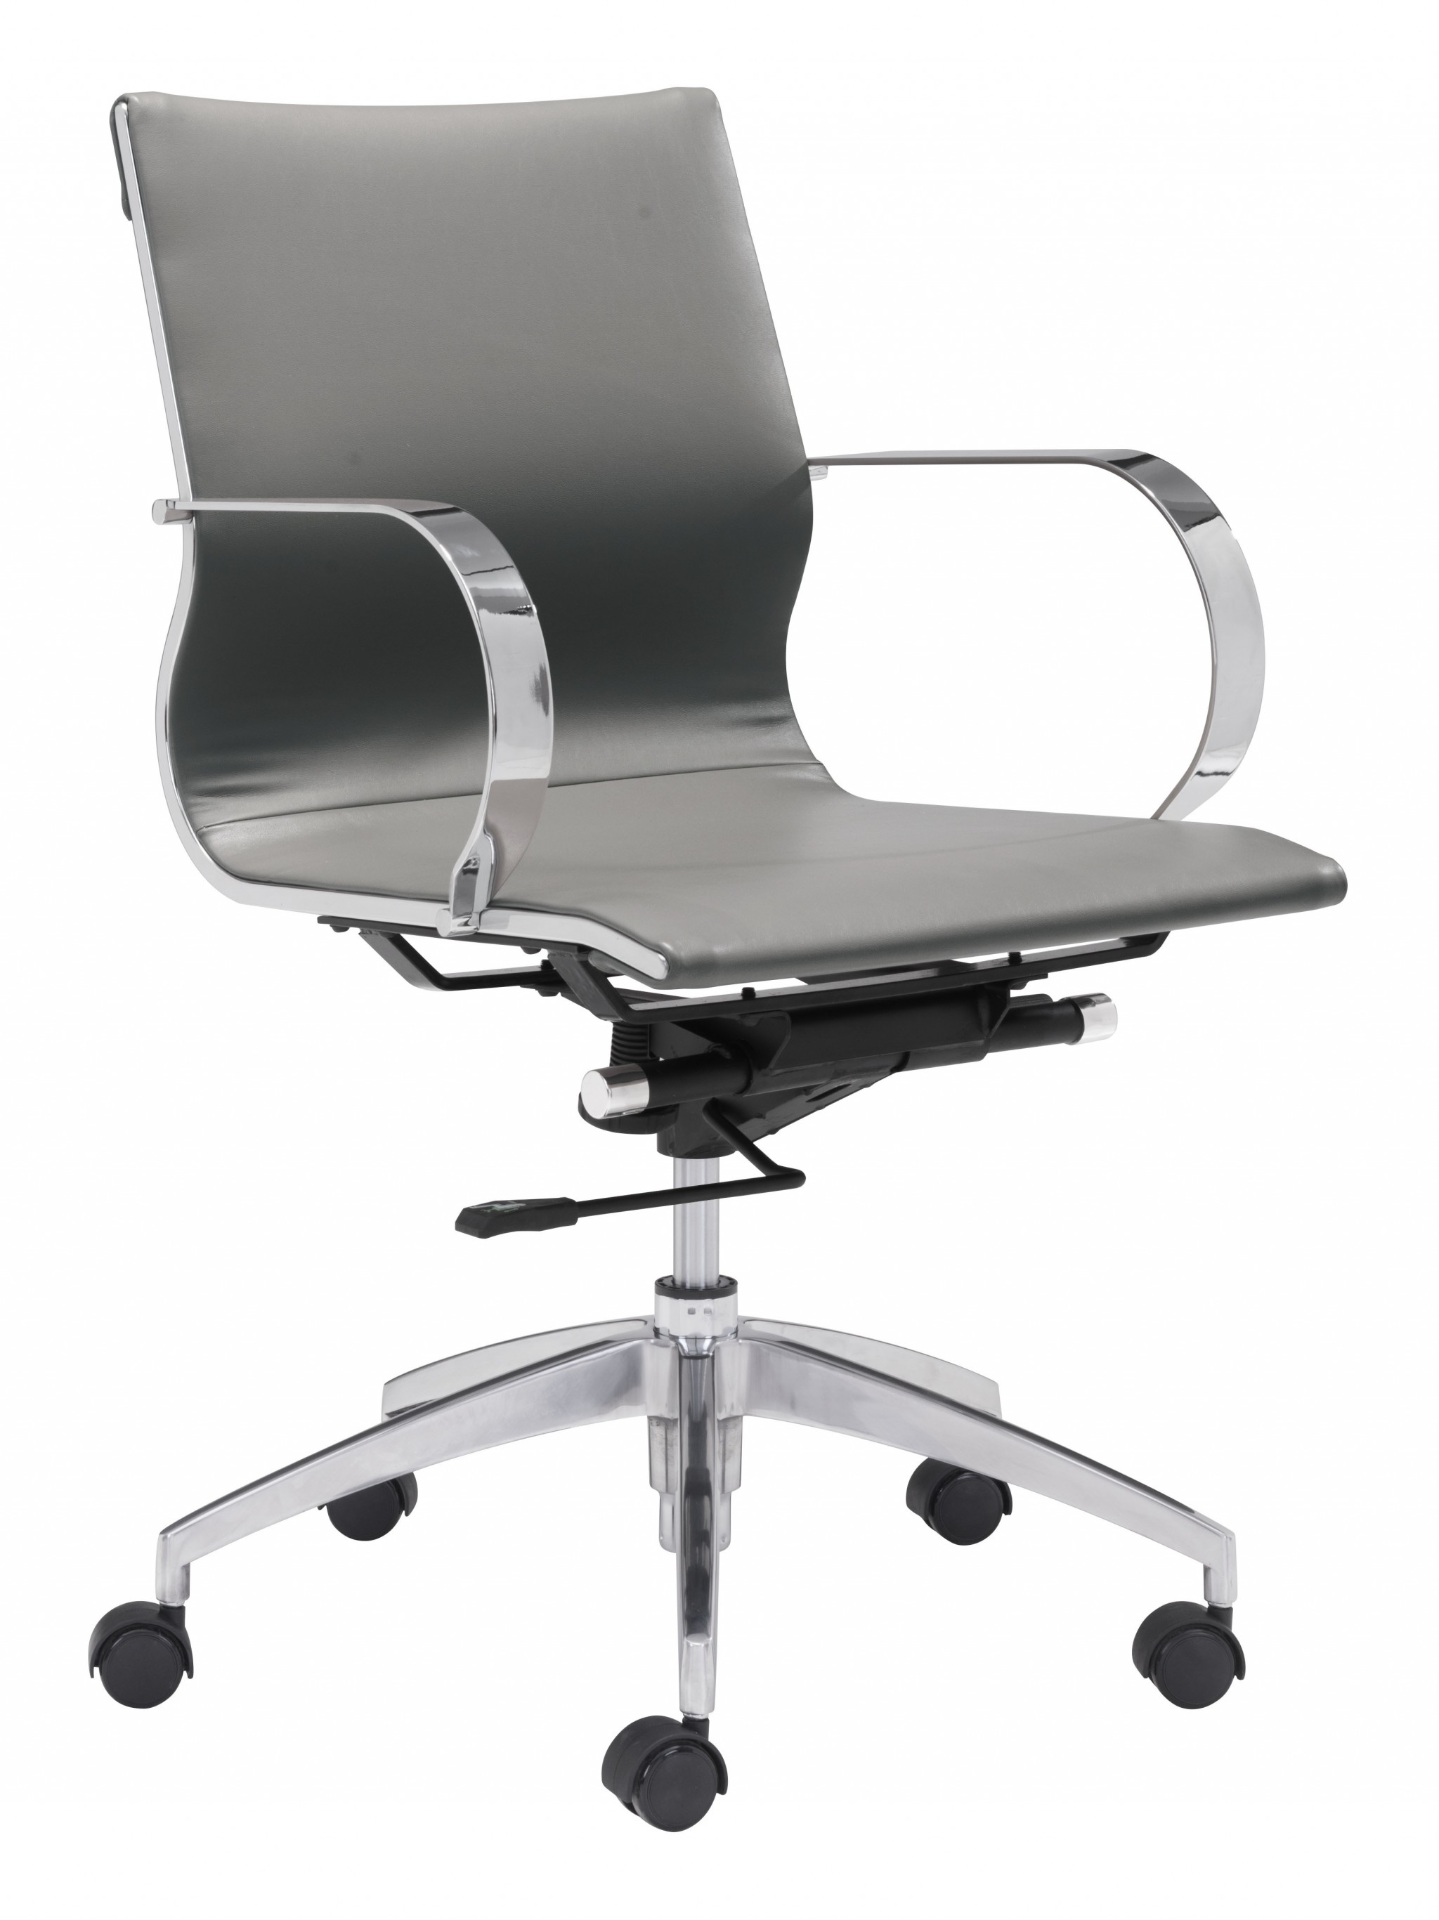 Ergonomic Low Back Rolling Office Chair - Gray - Higher Gallery Home Office